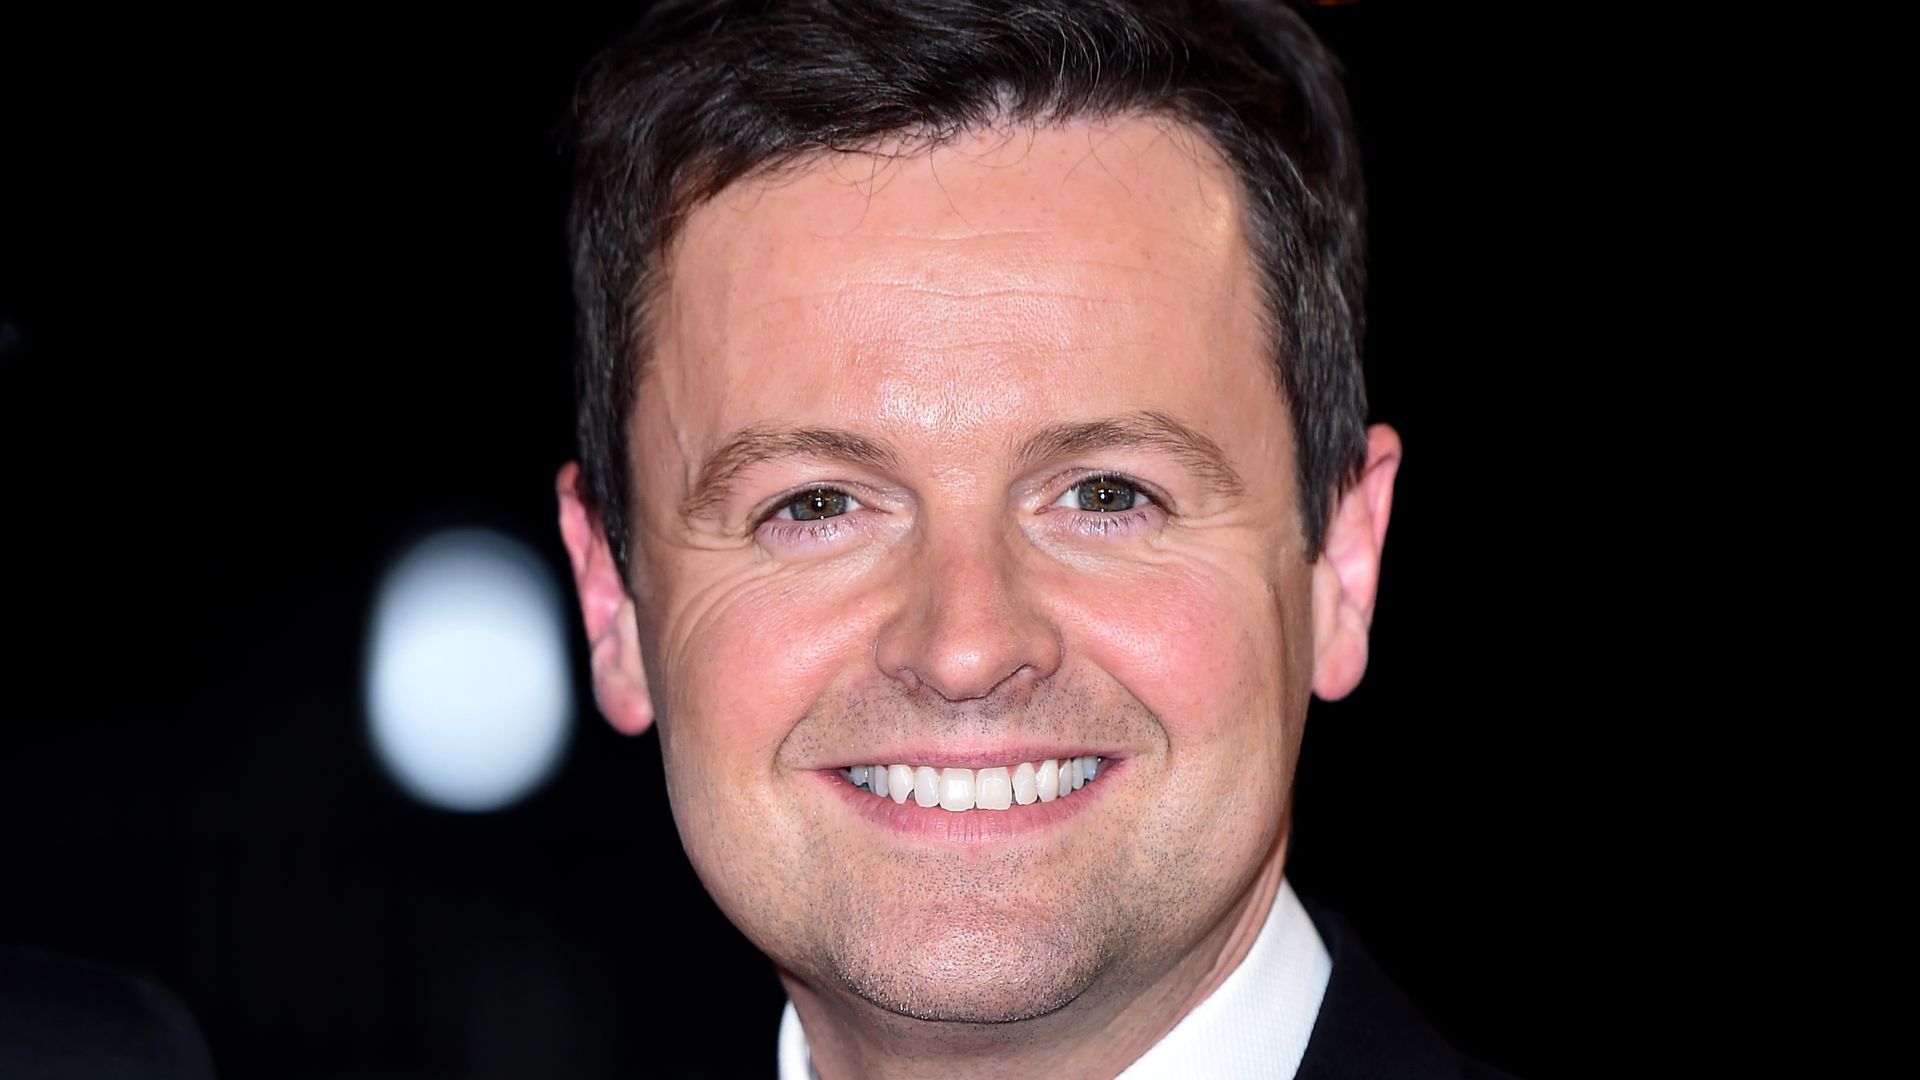 Declan Donnelly wearing a suit 